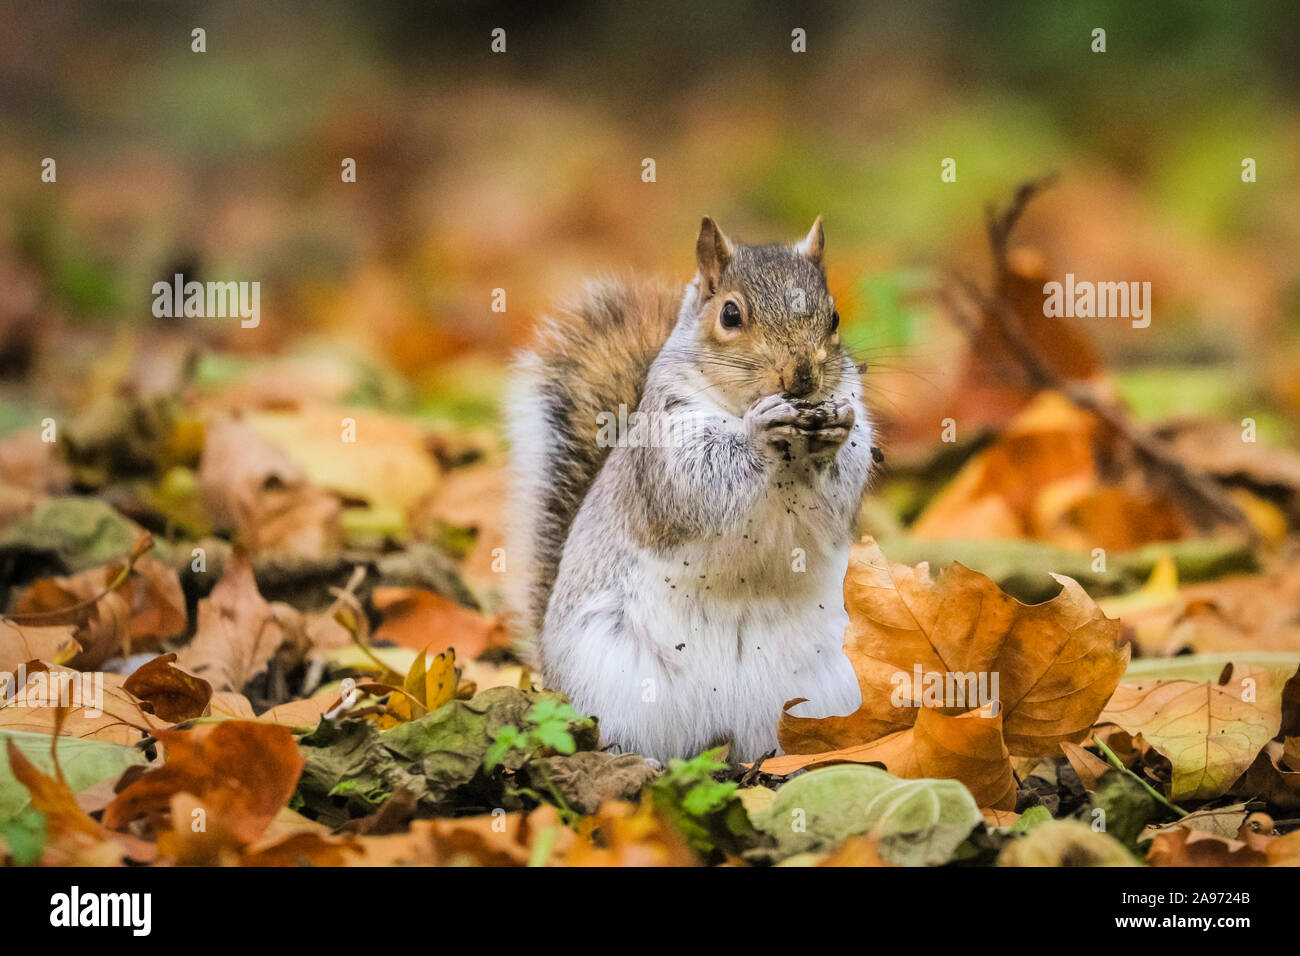 St James's Park, London, UK, 13th November 2019. A fluffy squirrel nibbles on a nut. Squirrels in London's St James's Park in Westminster enjoy the late autumn sunshine, digging for nuts and playing in the colourful fallen leaves. Credit: Imageplotter/Alamy Live News Stock Photo